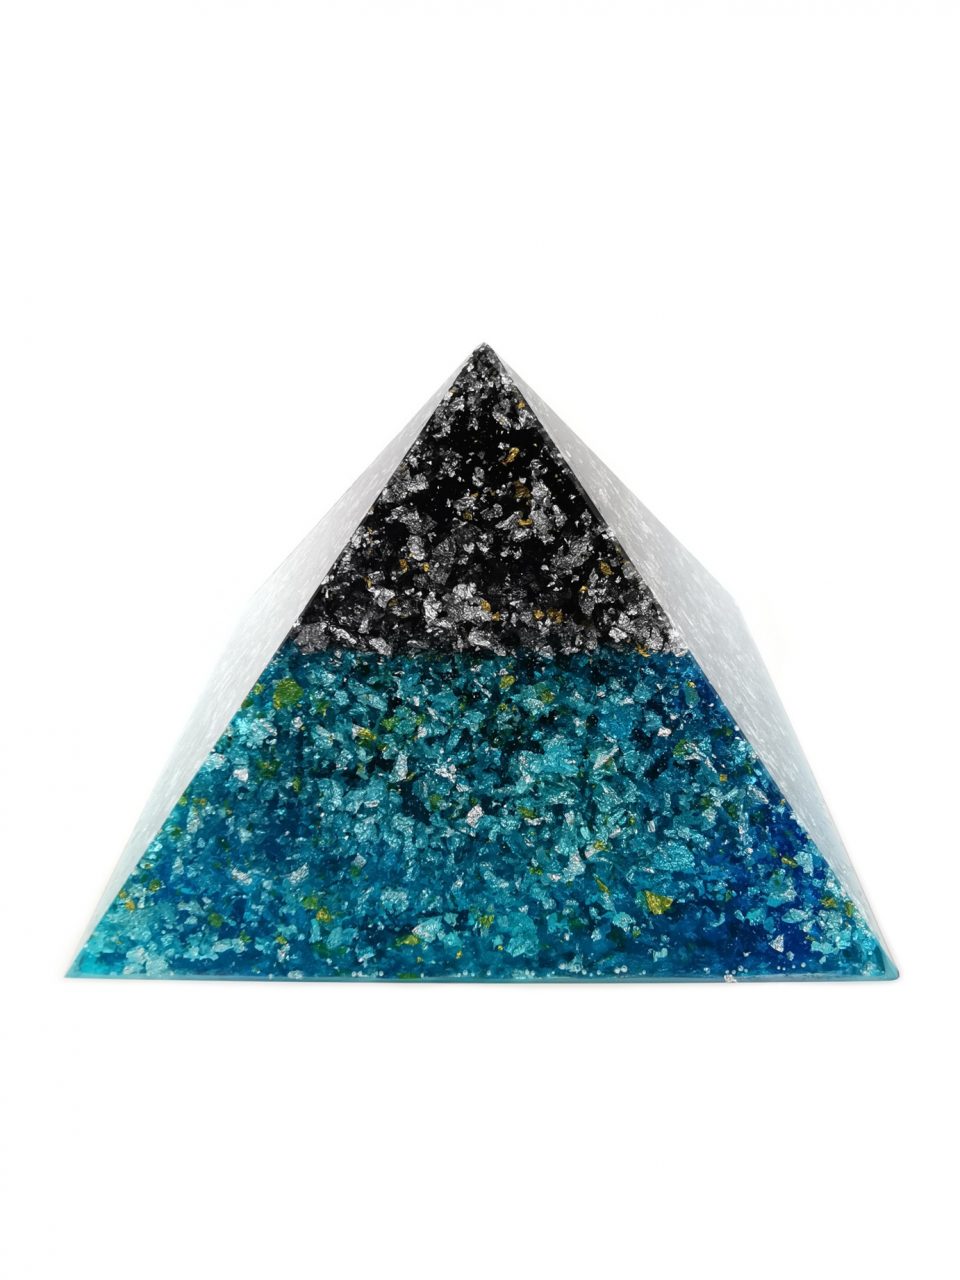 Black and Blue Orgone Pyramid by OrgoneVibes